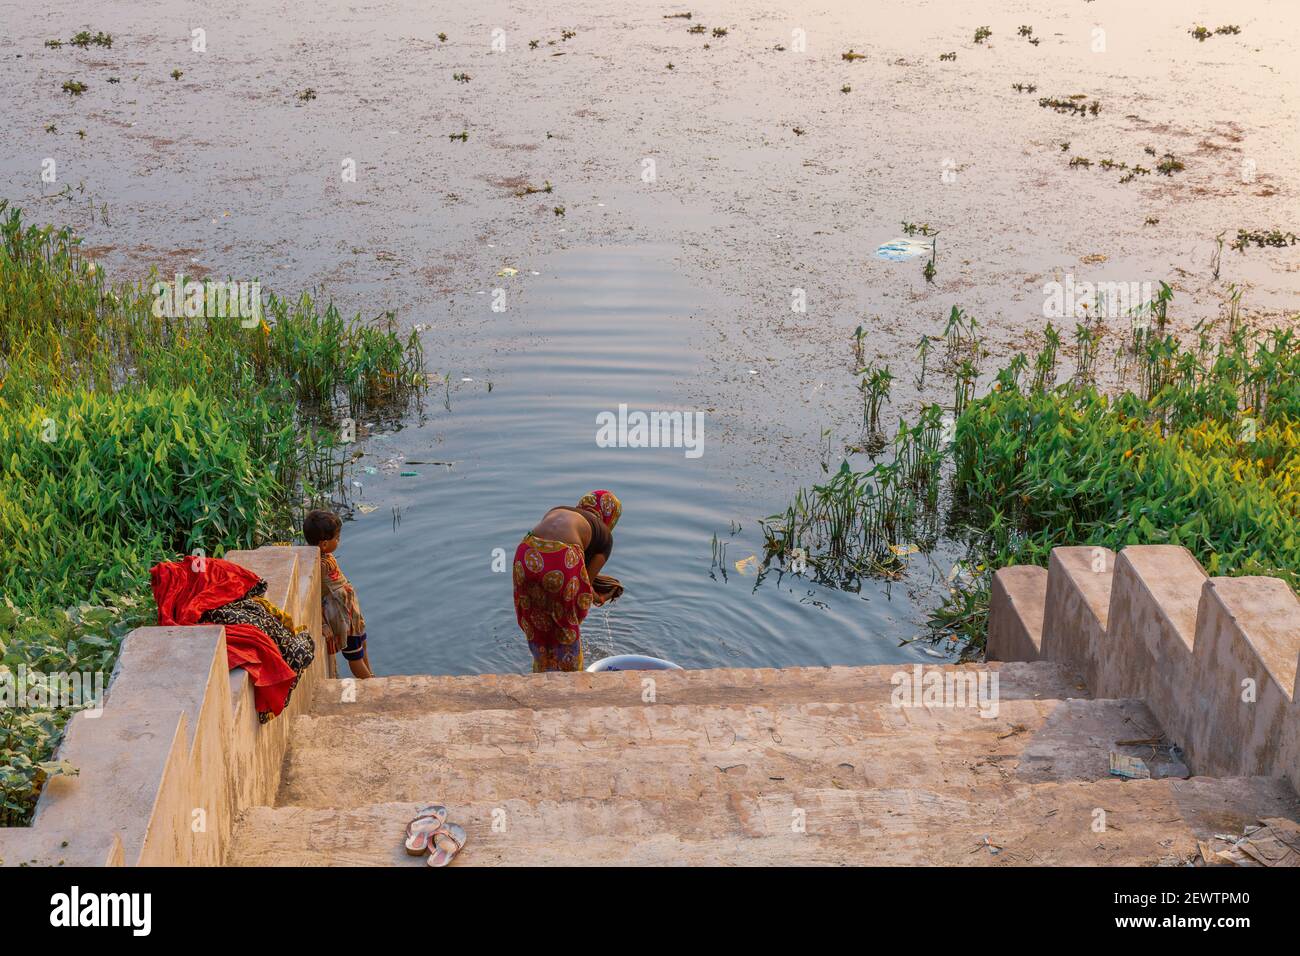 Rural woman washing her clothes at a river bank while her child looks on at a village in West Bengal, India Stock Photo